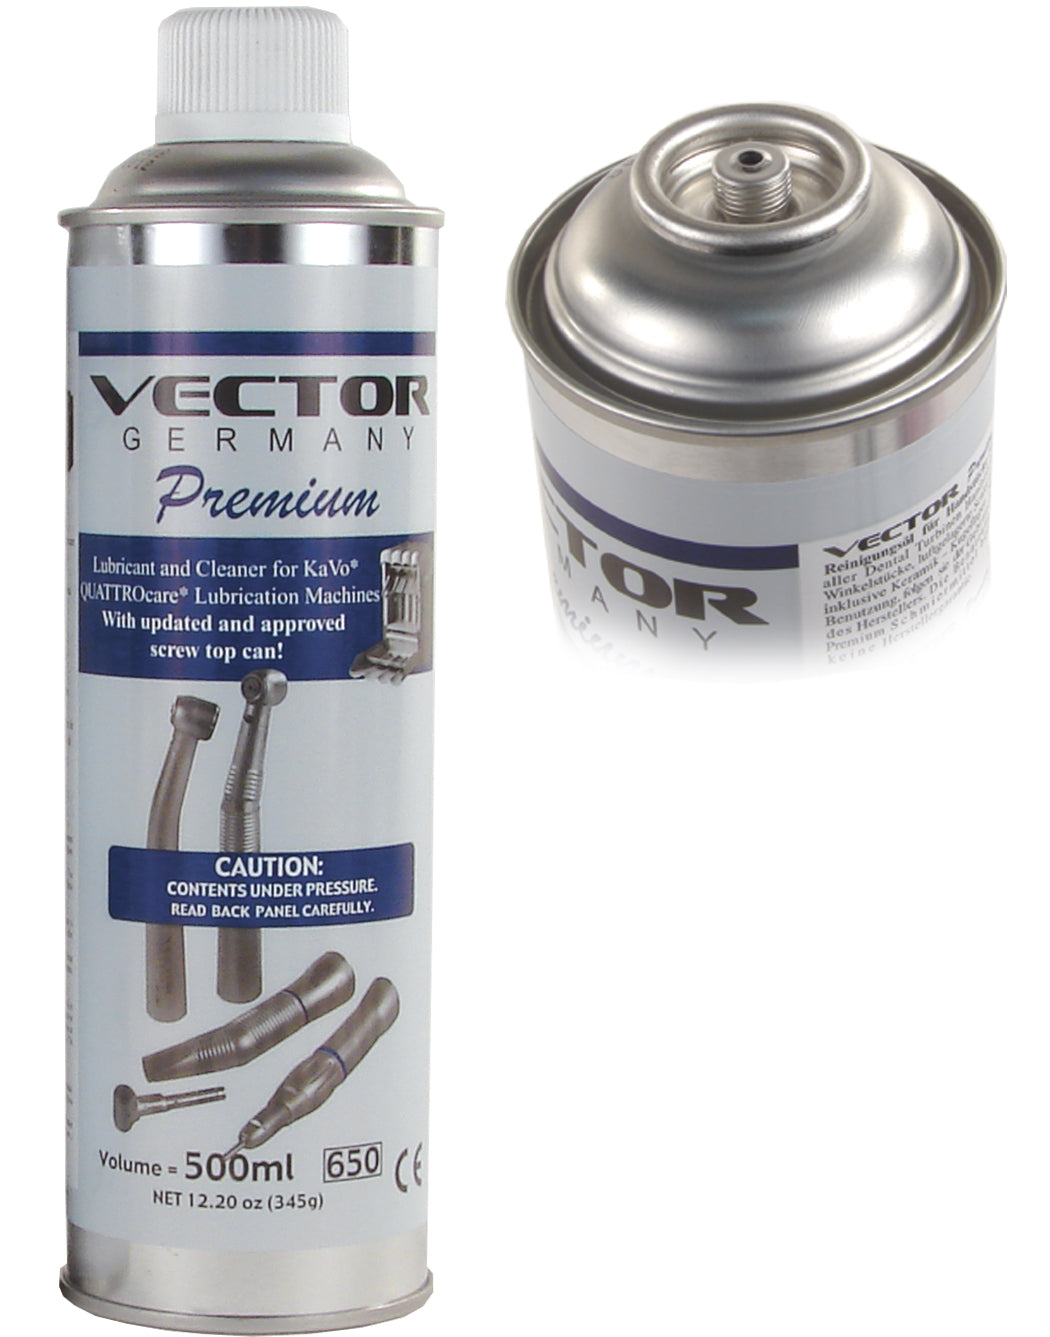 Vector VL-AQ High-performance Lubricant for KaVo Quattrocare Machine